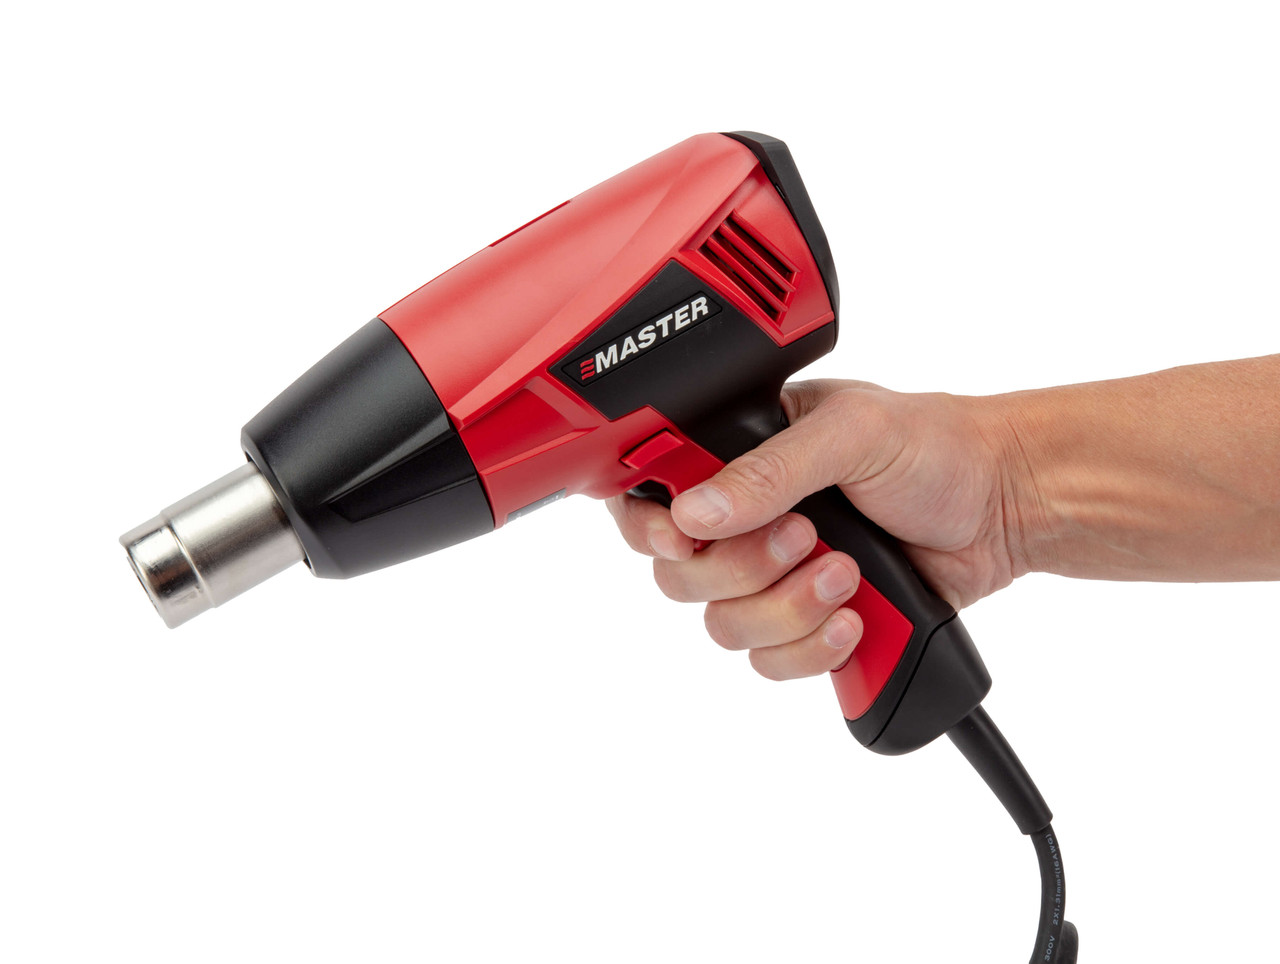 WORKPRO 1200W Heat Gun with Dual Temperature, Model 2244, New